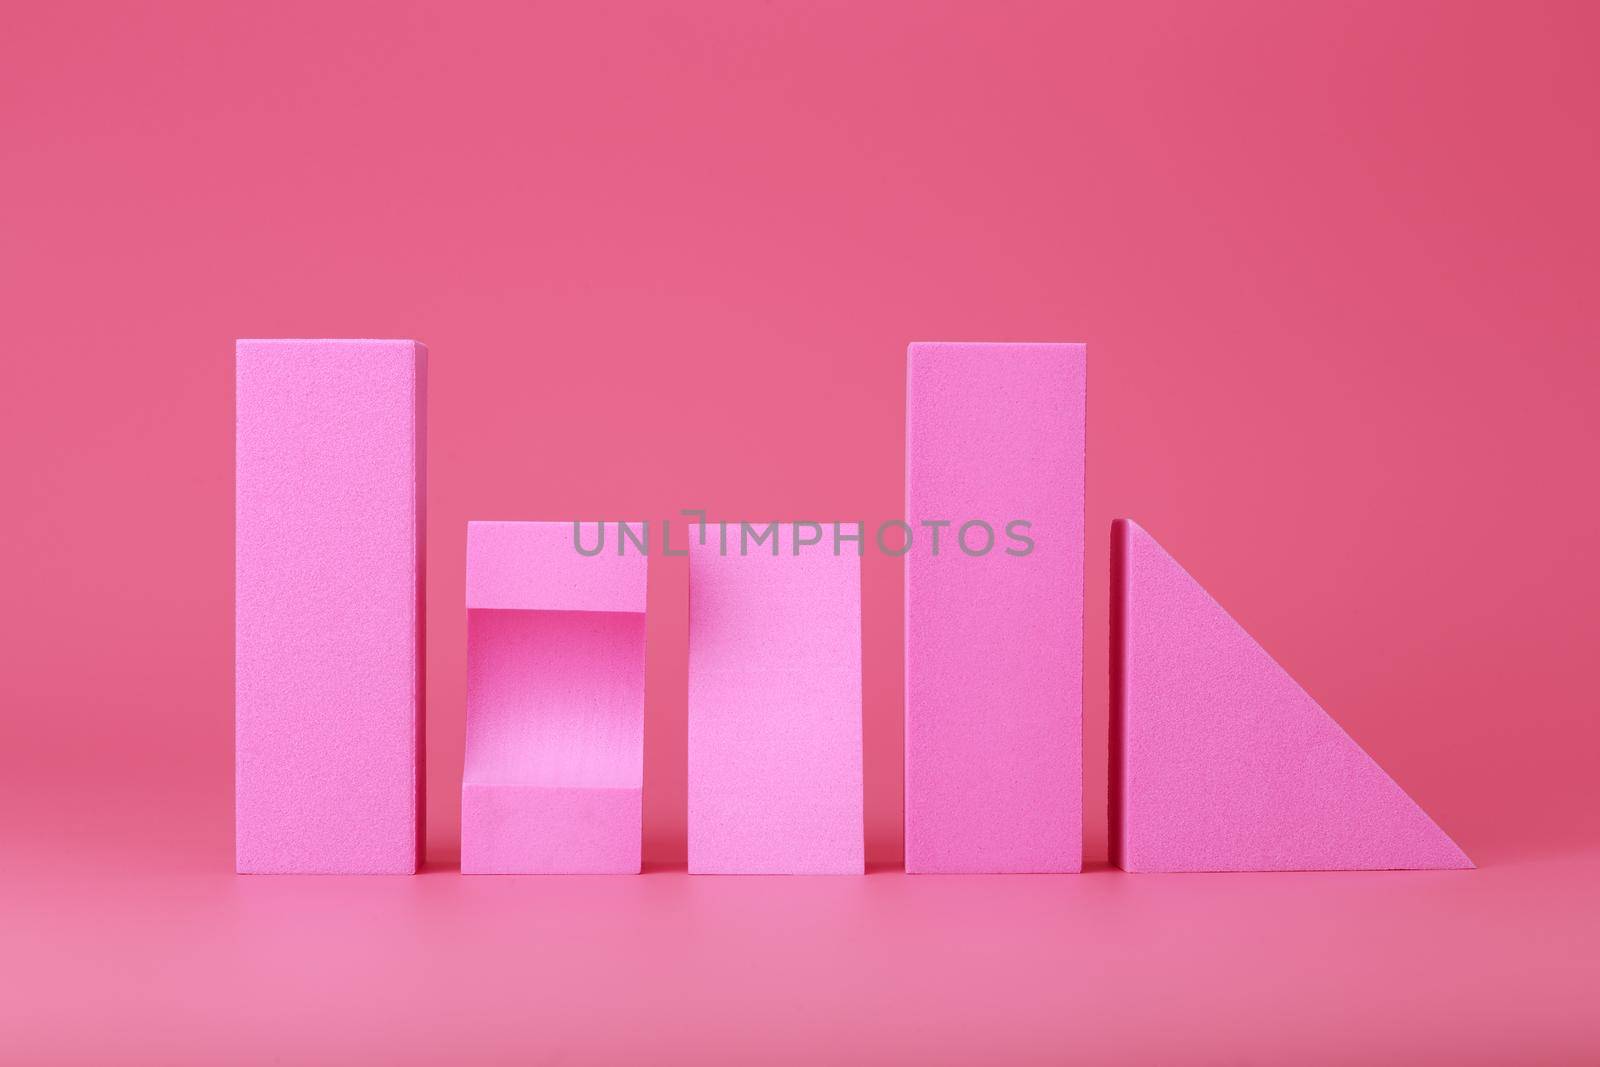 Abstract trendy futuristic background in pink colors with copy space. Monochromatic artsy background with different geometric figures in a row